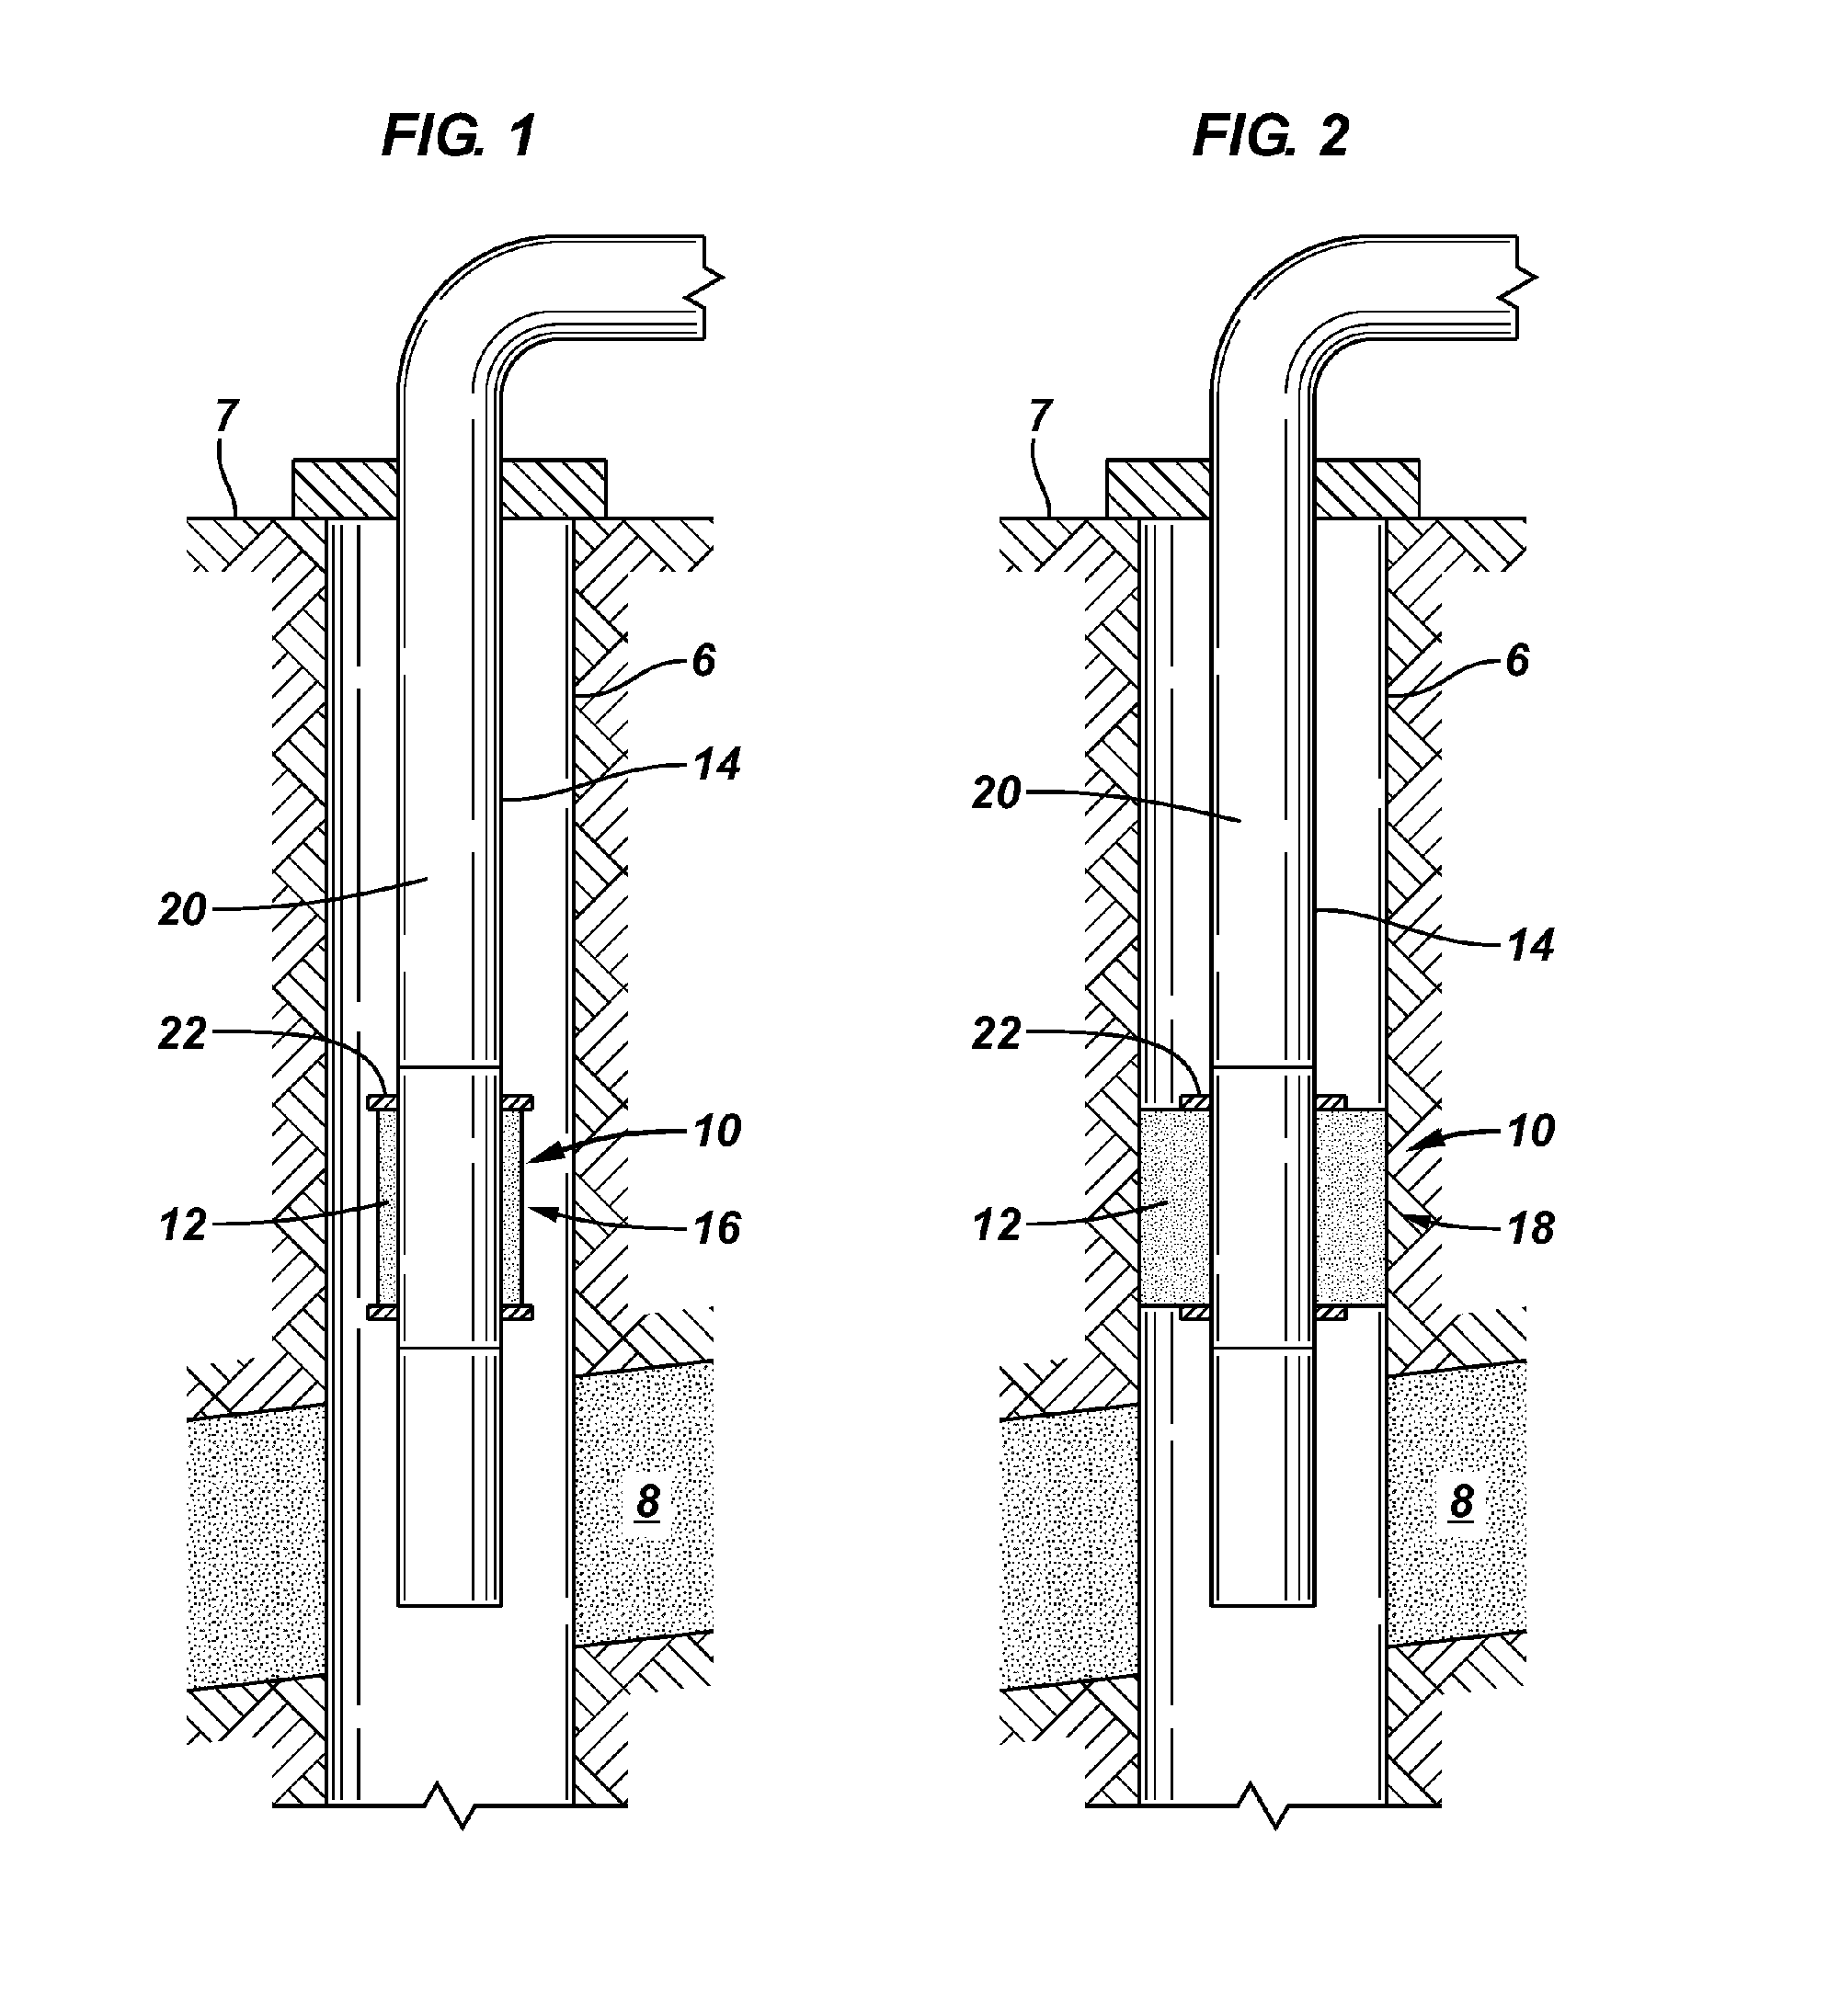 System and Method to Seal Using a Swellable Material